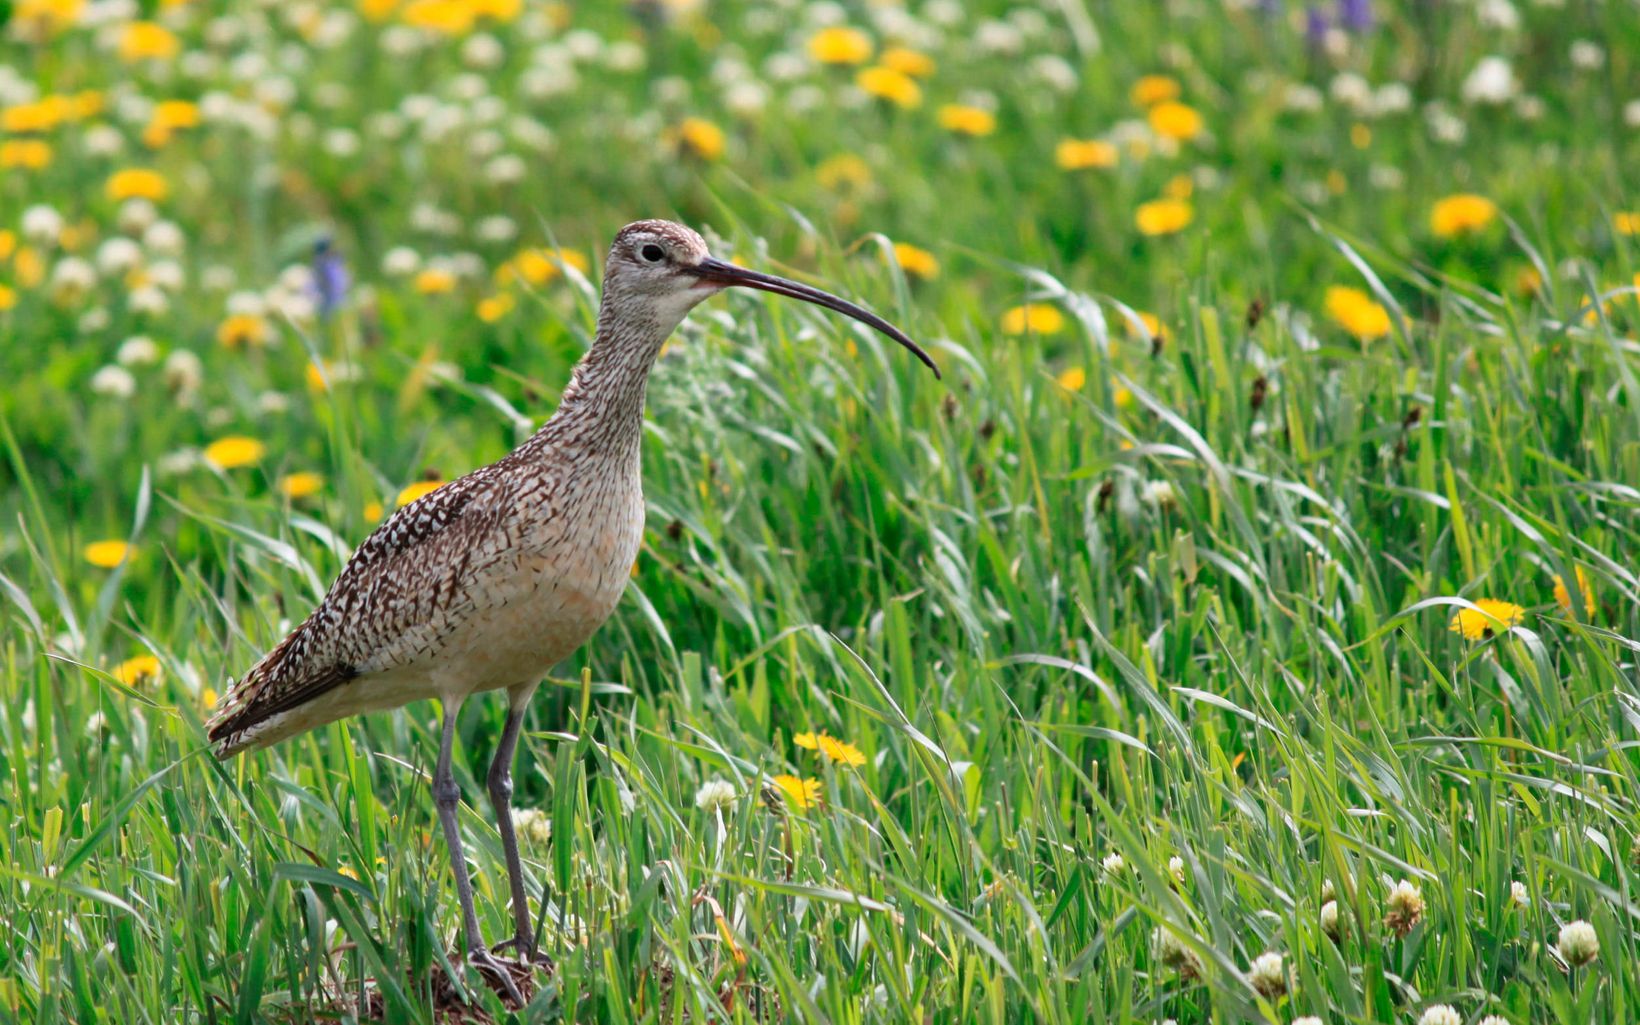 A mottled brown bird with a very long, curved beak stands in a field of wildflowers.